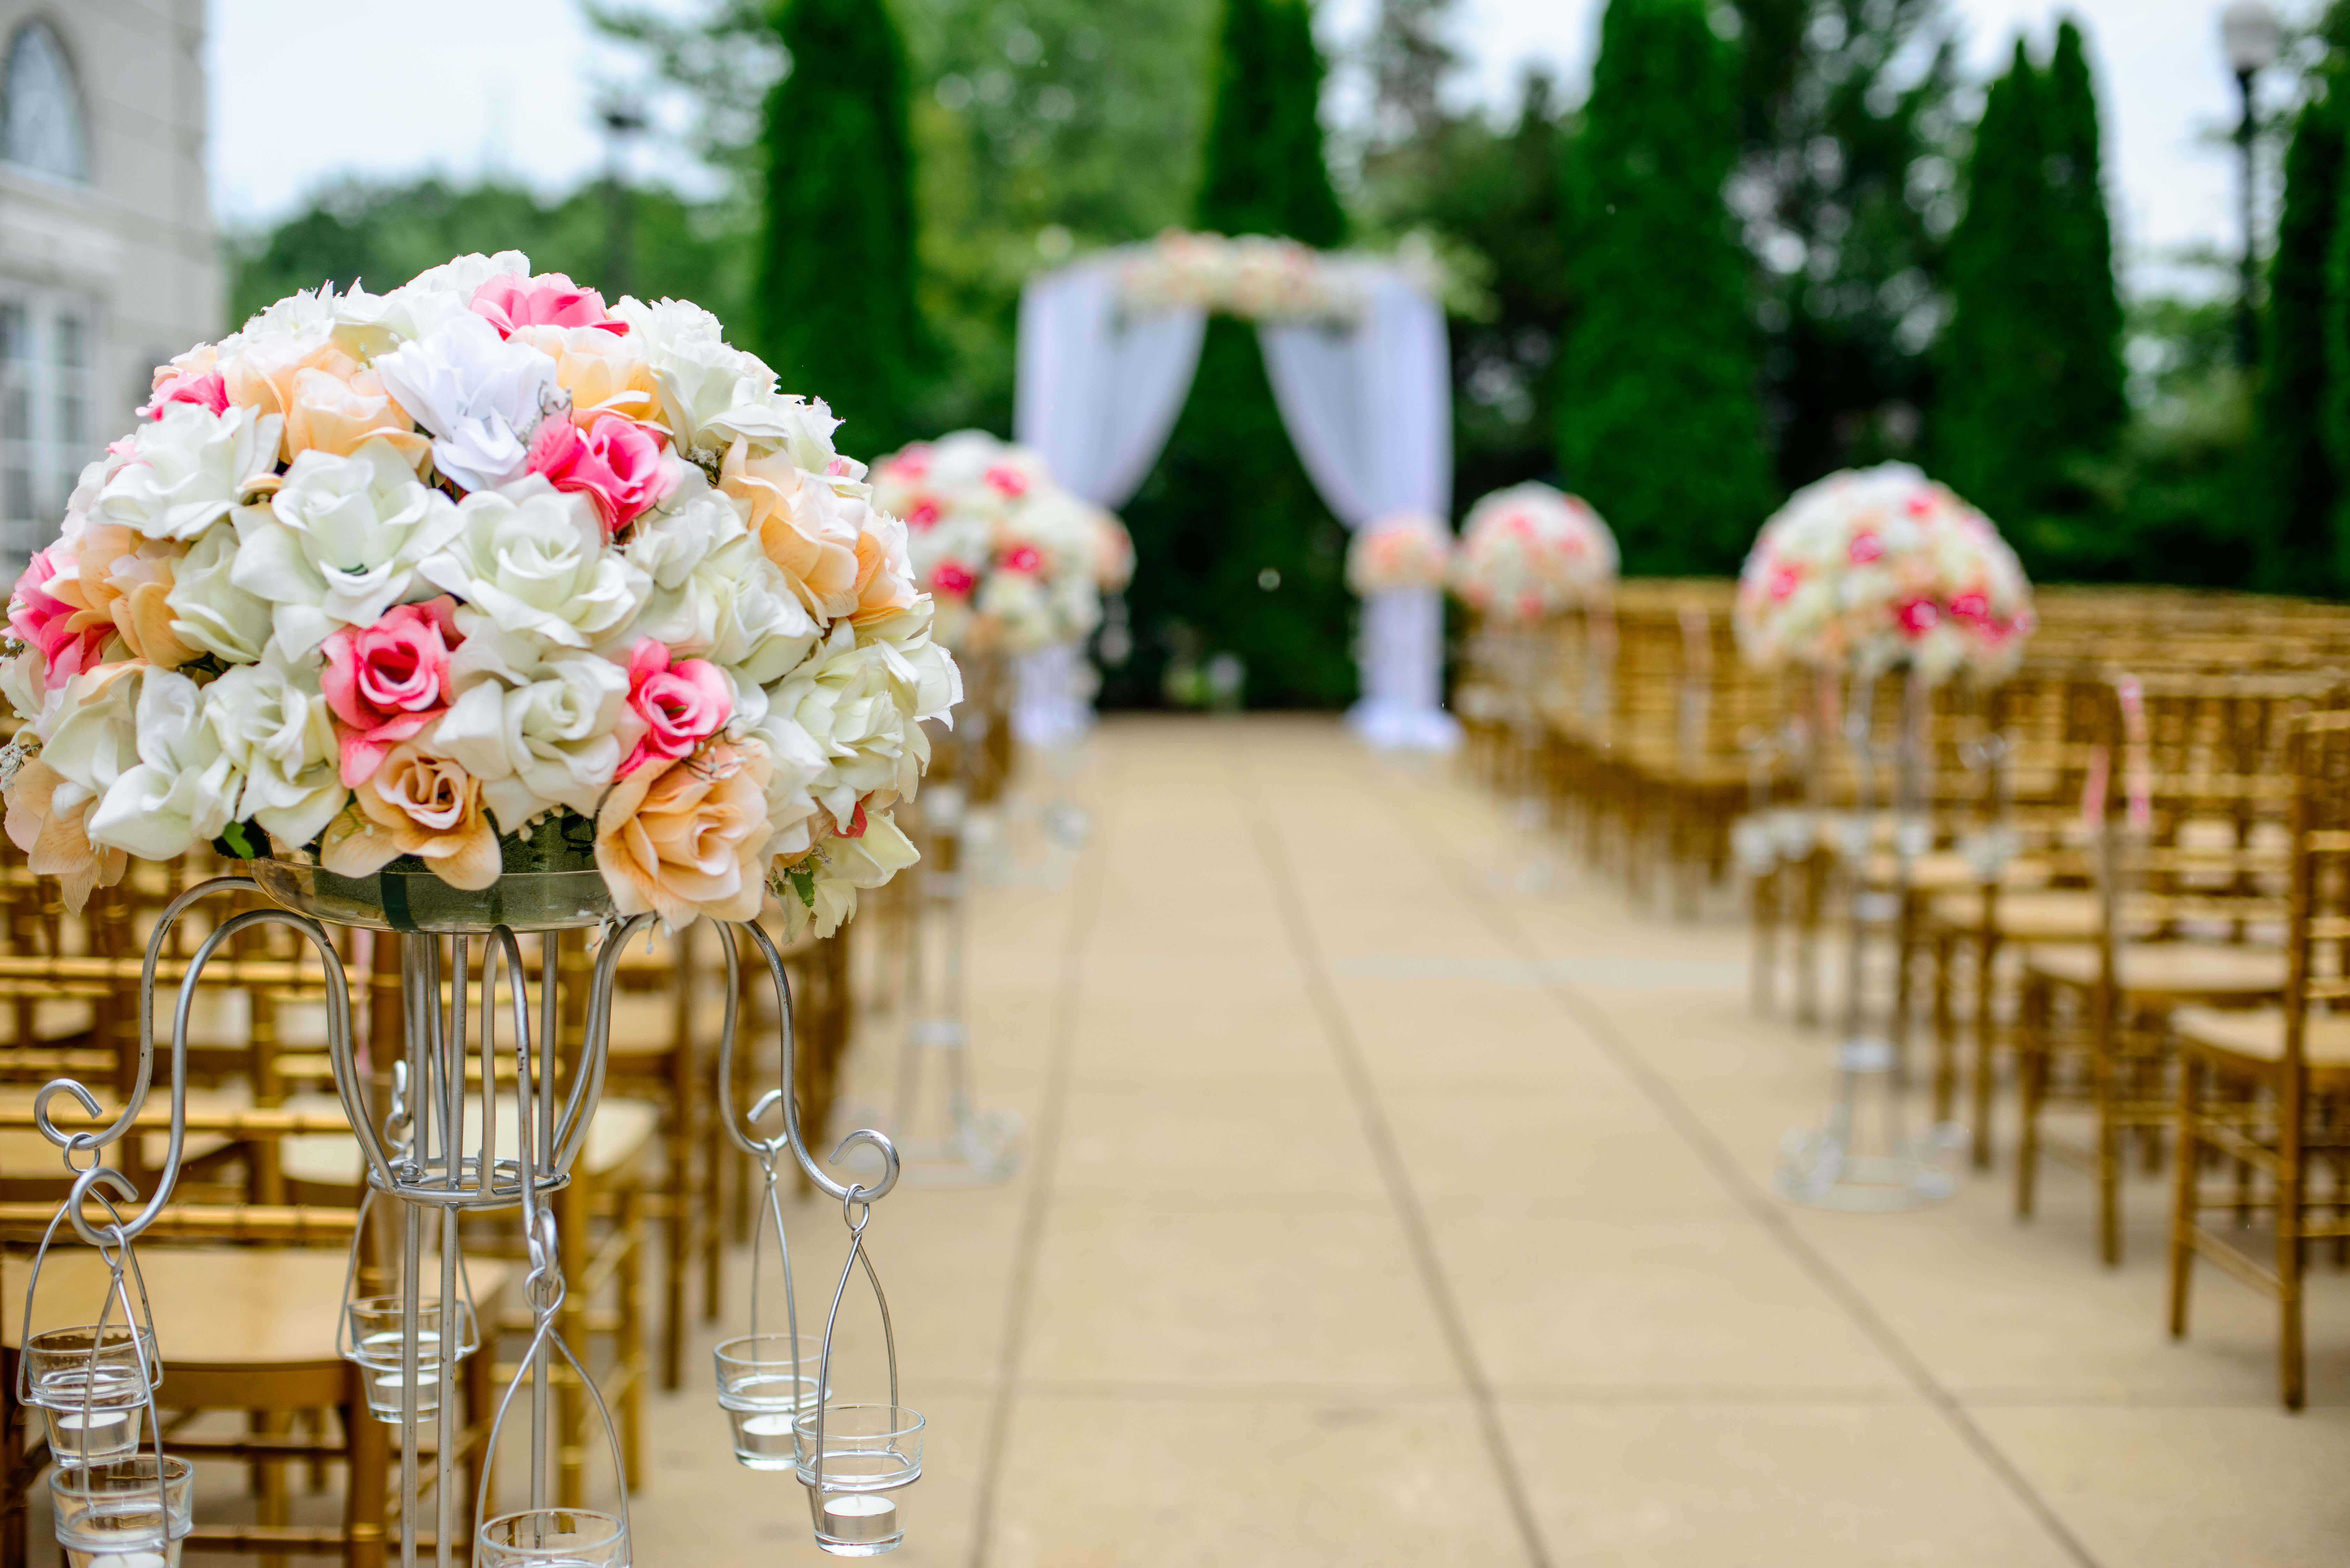 How To Donate Wedding Flowers After Your Nuptials